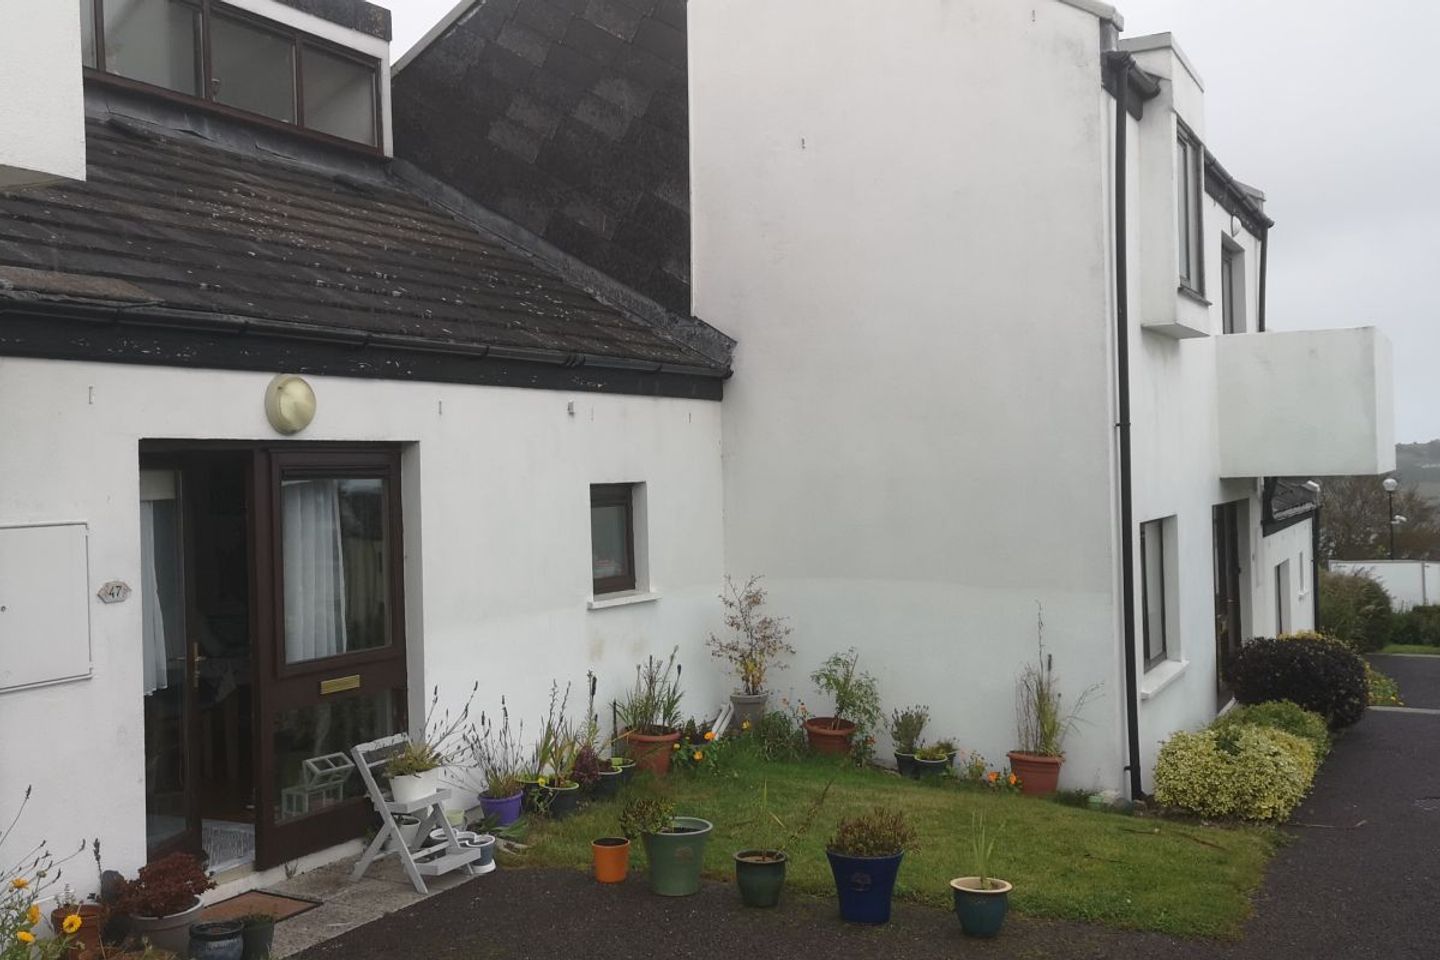 47 Carleton Village, Golf Links Road, Youghal, Youghal, Co. Cork, P36FC65